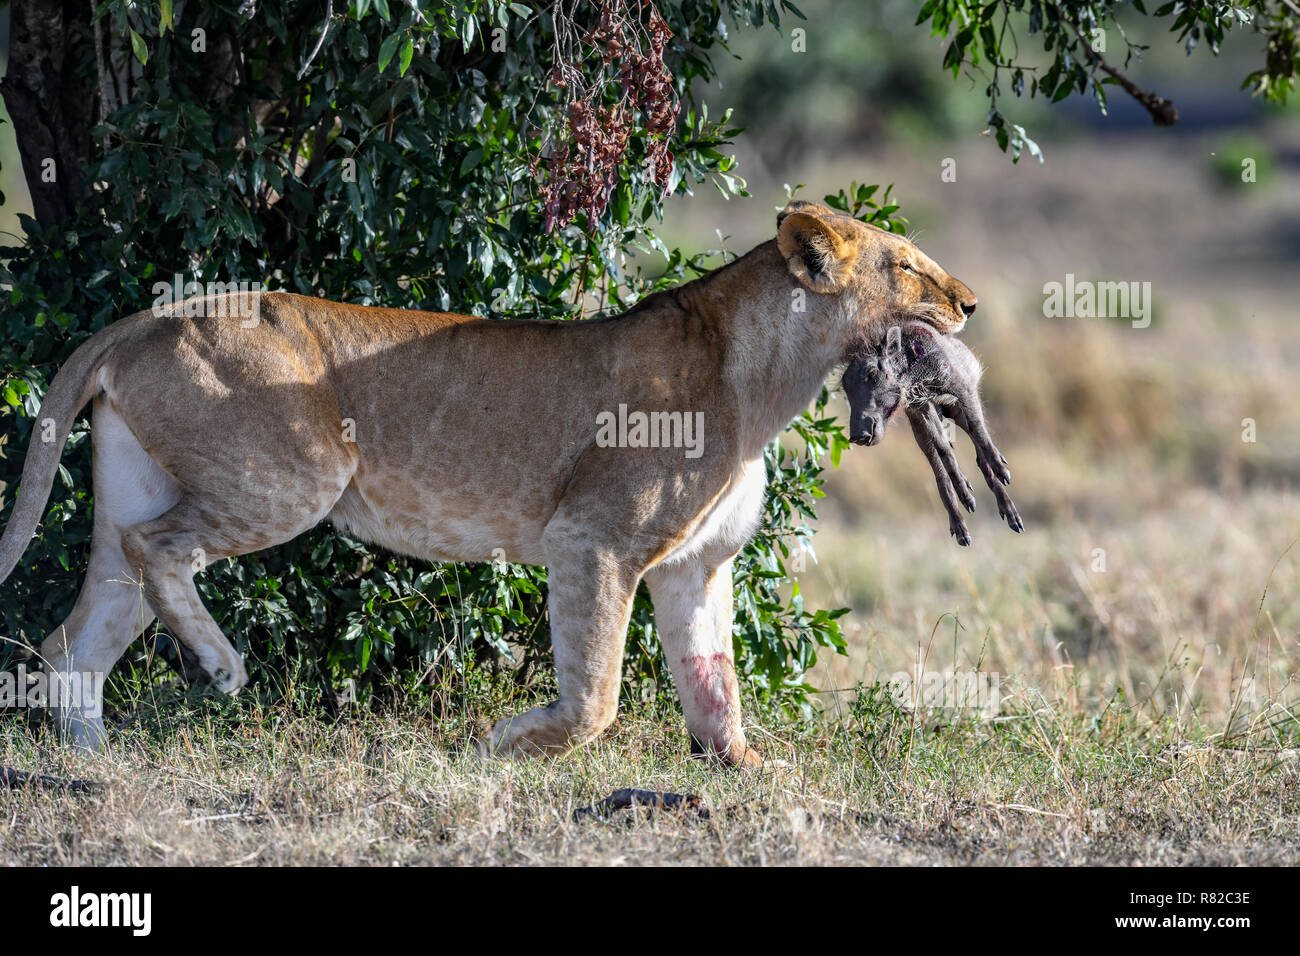 Lioness With Baby Warthog In Mouth In Kenya Africa Stock Photo Alamy